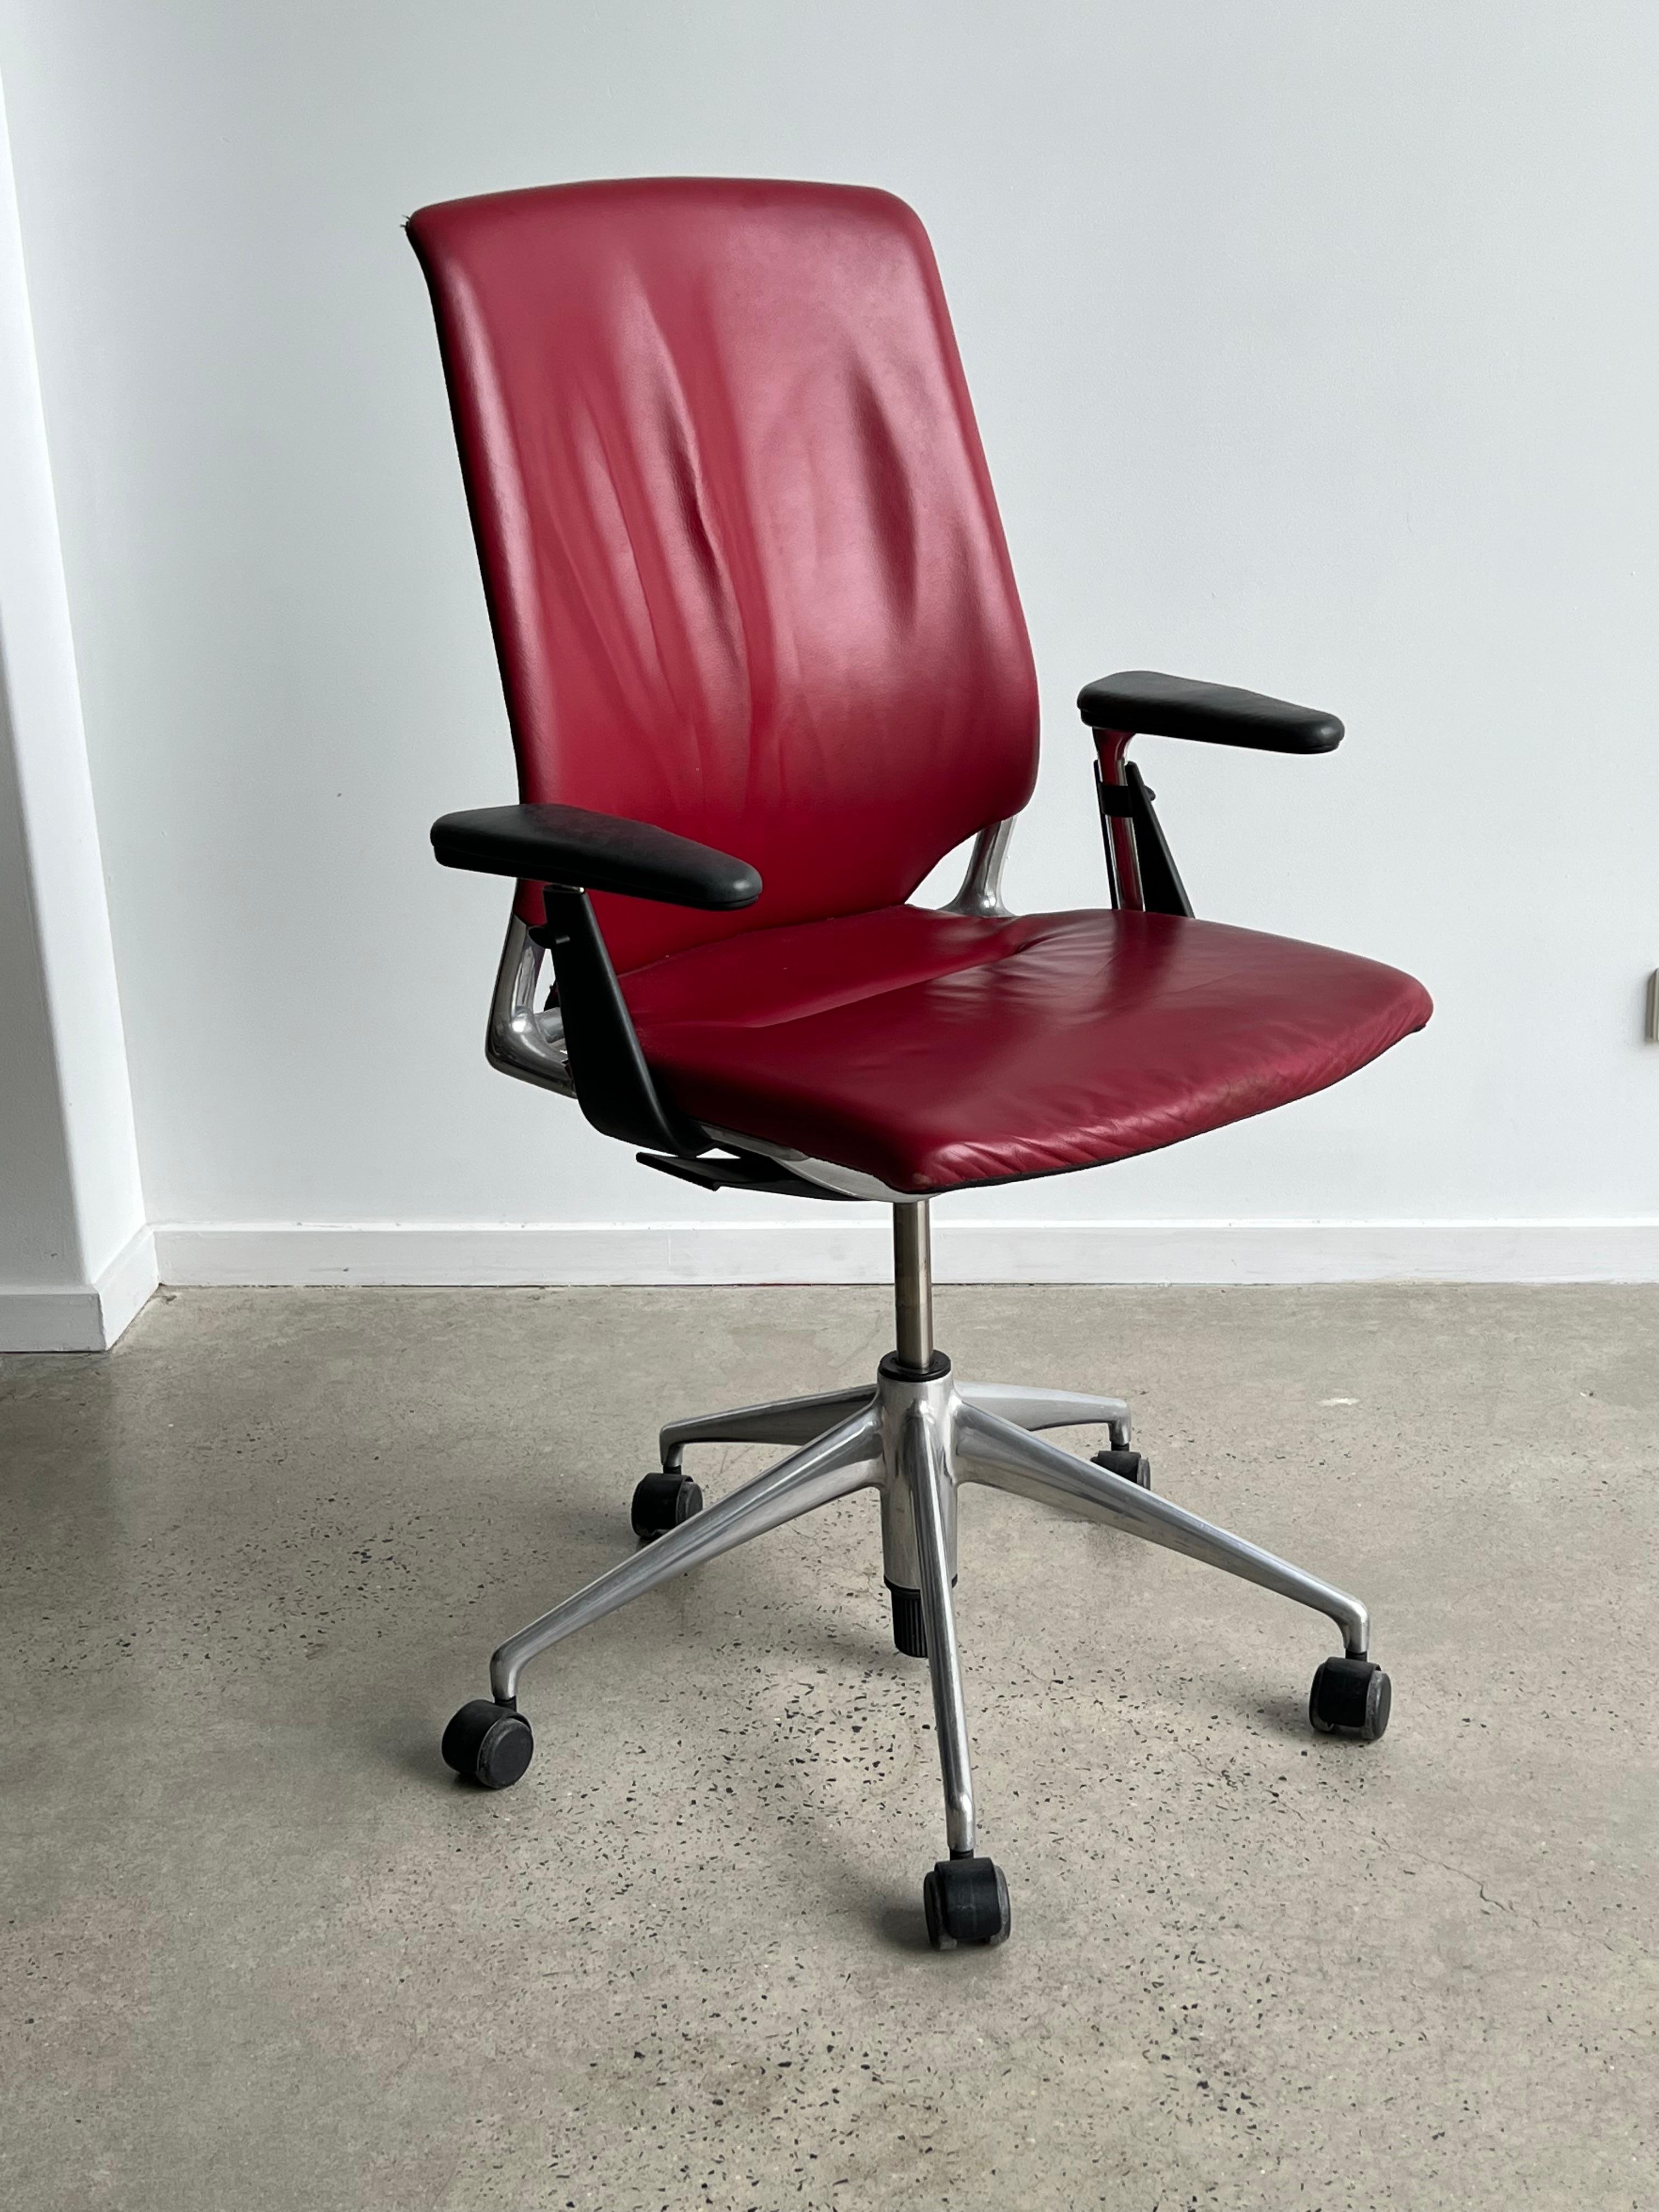 Red Leather and aluminium adjstable office chair by Alberto Meda for Vitra 1990
Perfect working condition.